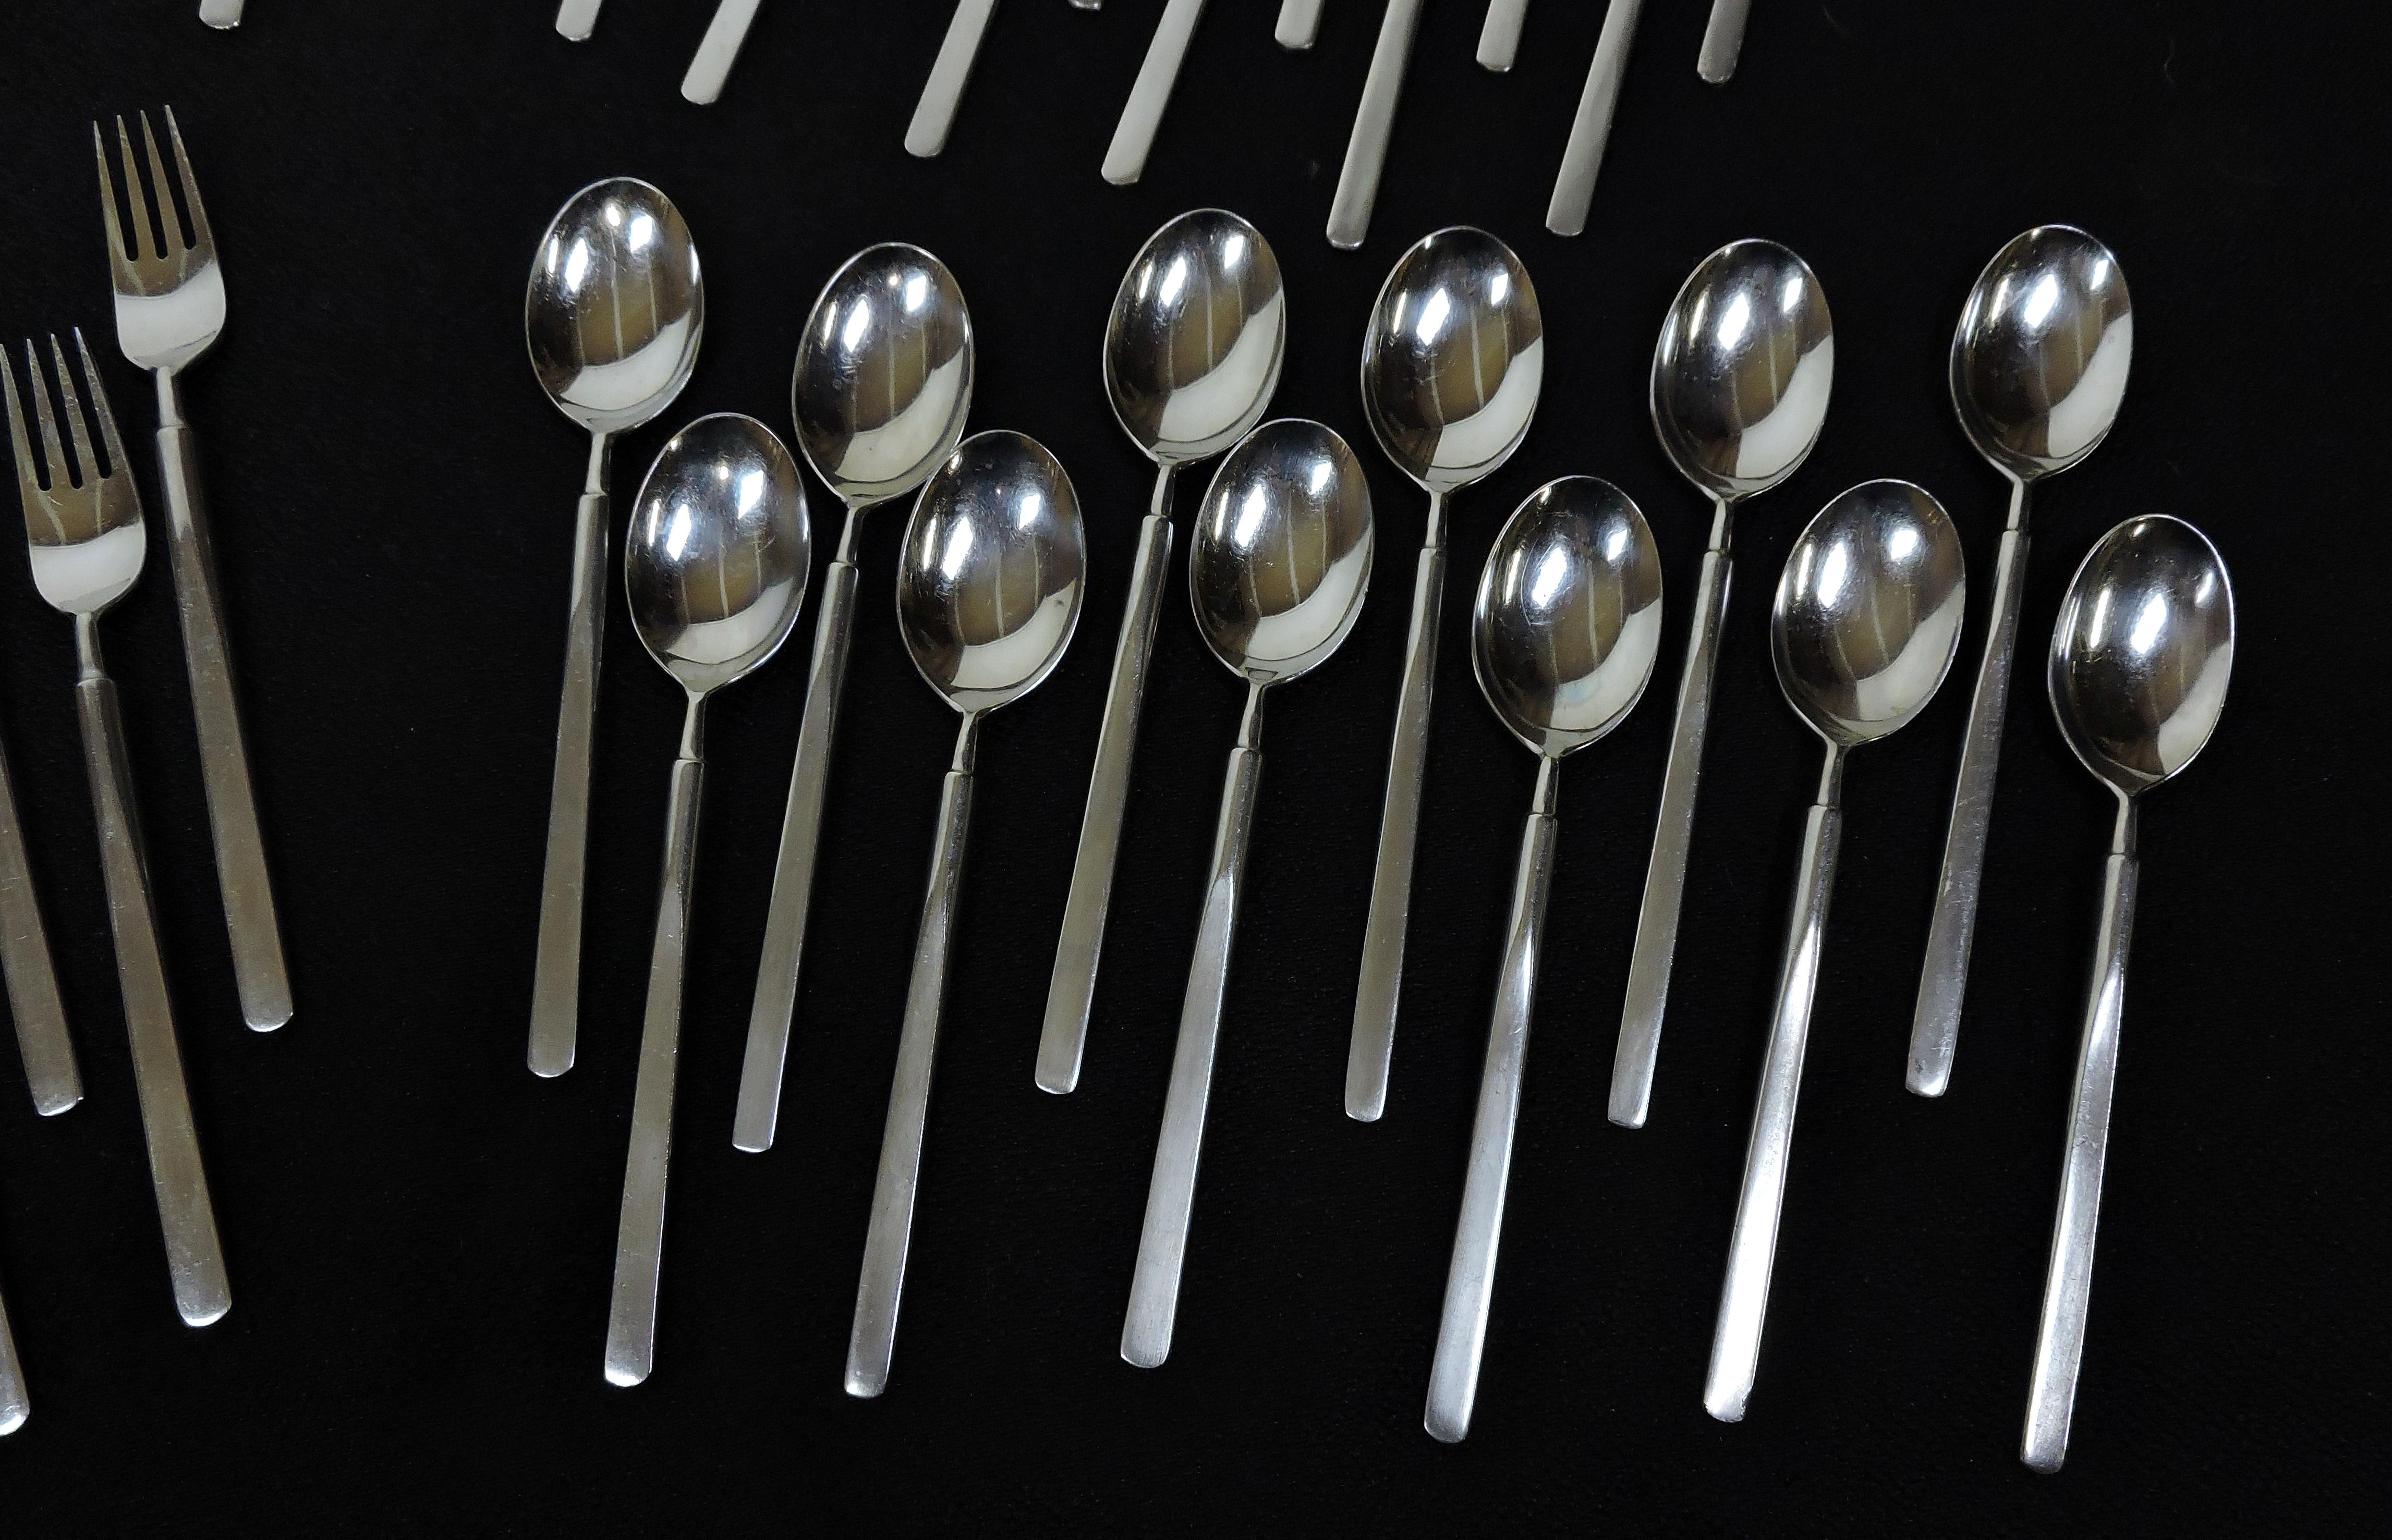 Beautiful 71 piece set of Towle supreme cutlery flatware service in the Stereo pattern. This set consists of 11 forks, 12 salad forks, 12 soup spoons, 12 teaspoons, 10 knives, 12 cocktail forks, and two serving spoons. These have a great modernist